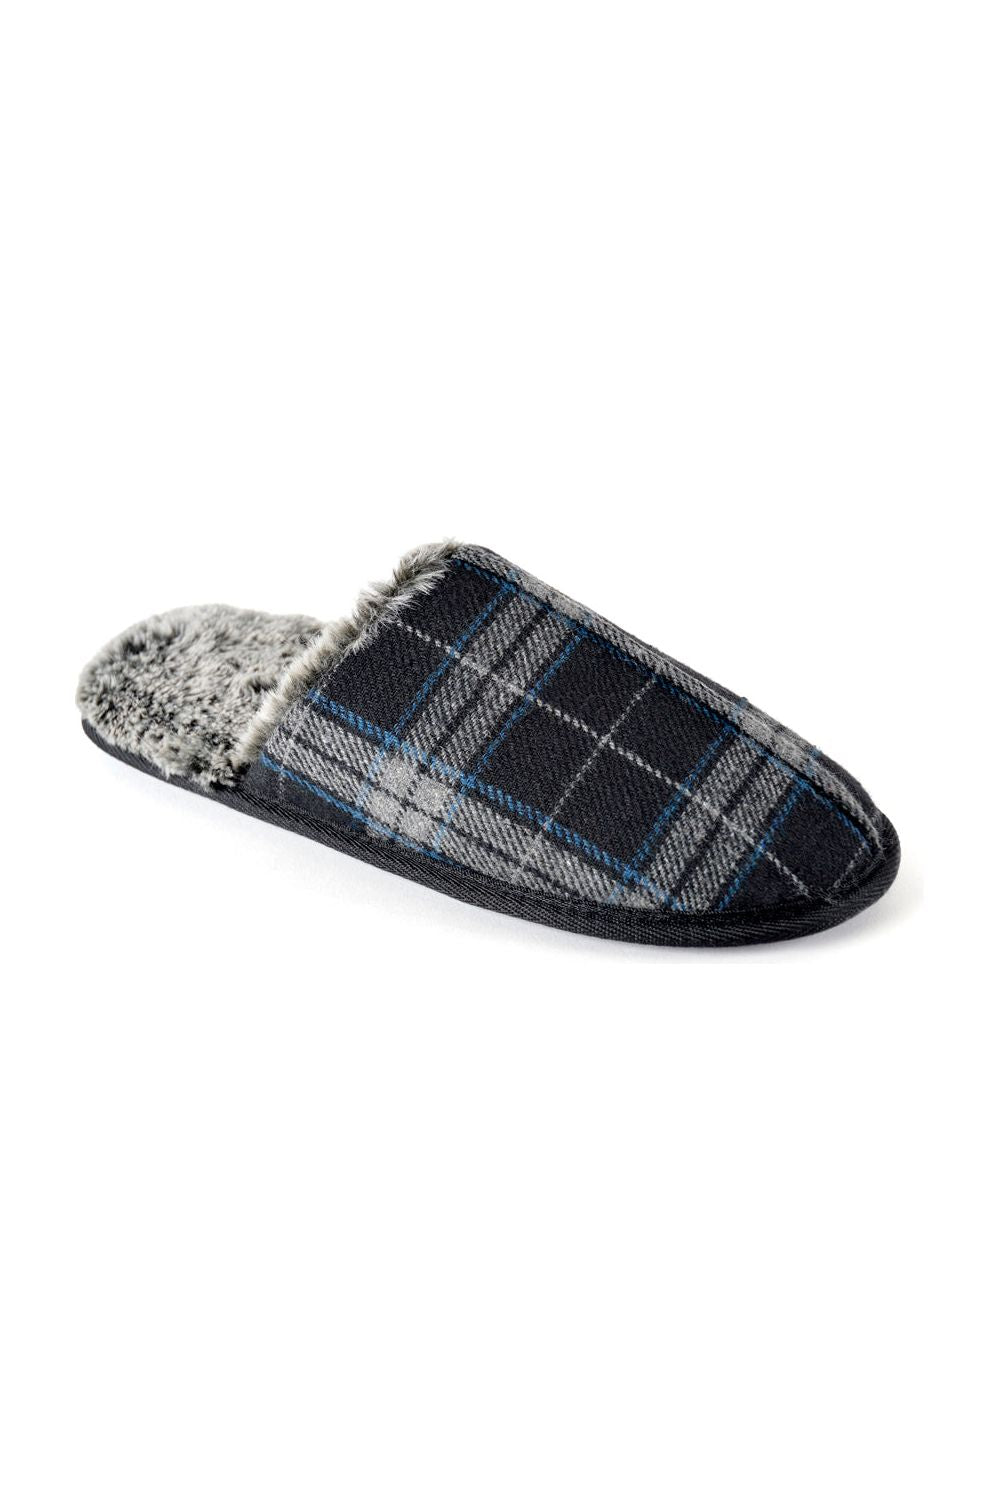 Mens Slip On Dark Grey And Blue Check Slippers